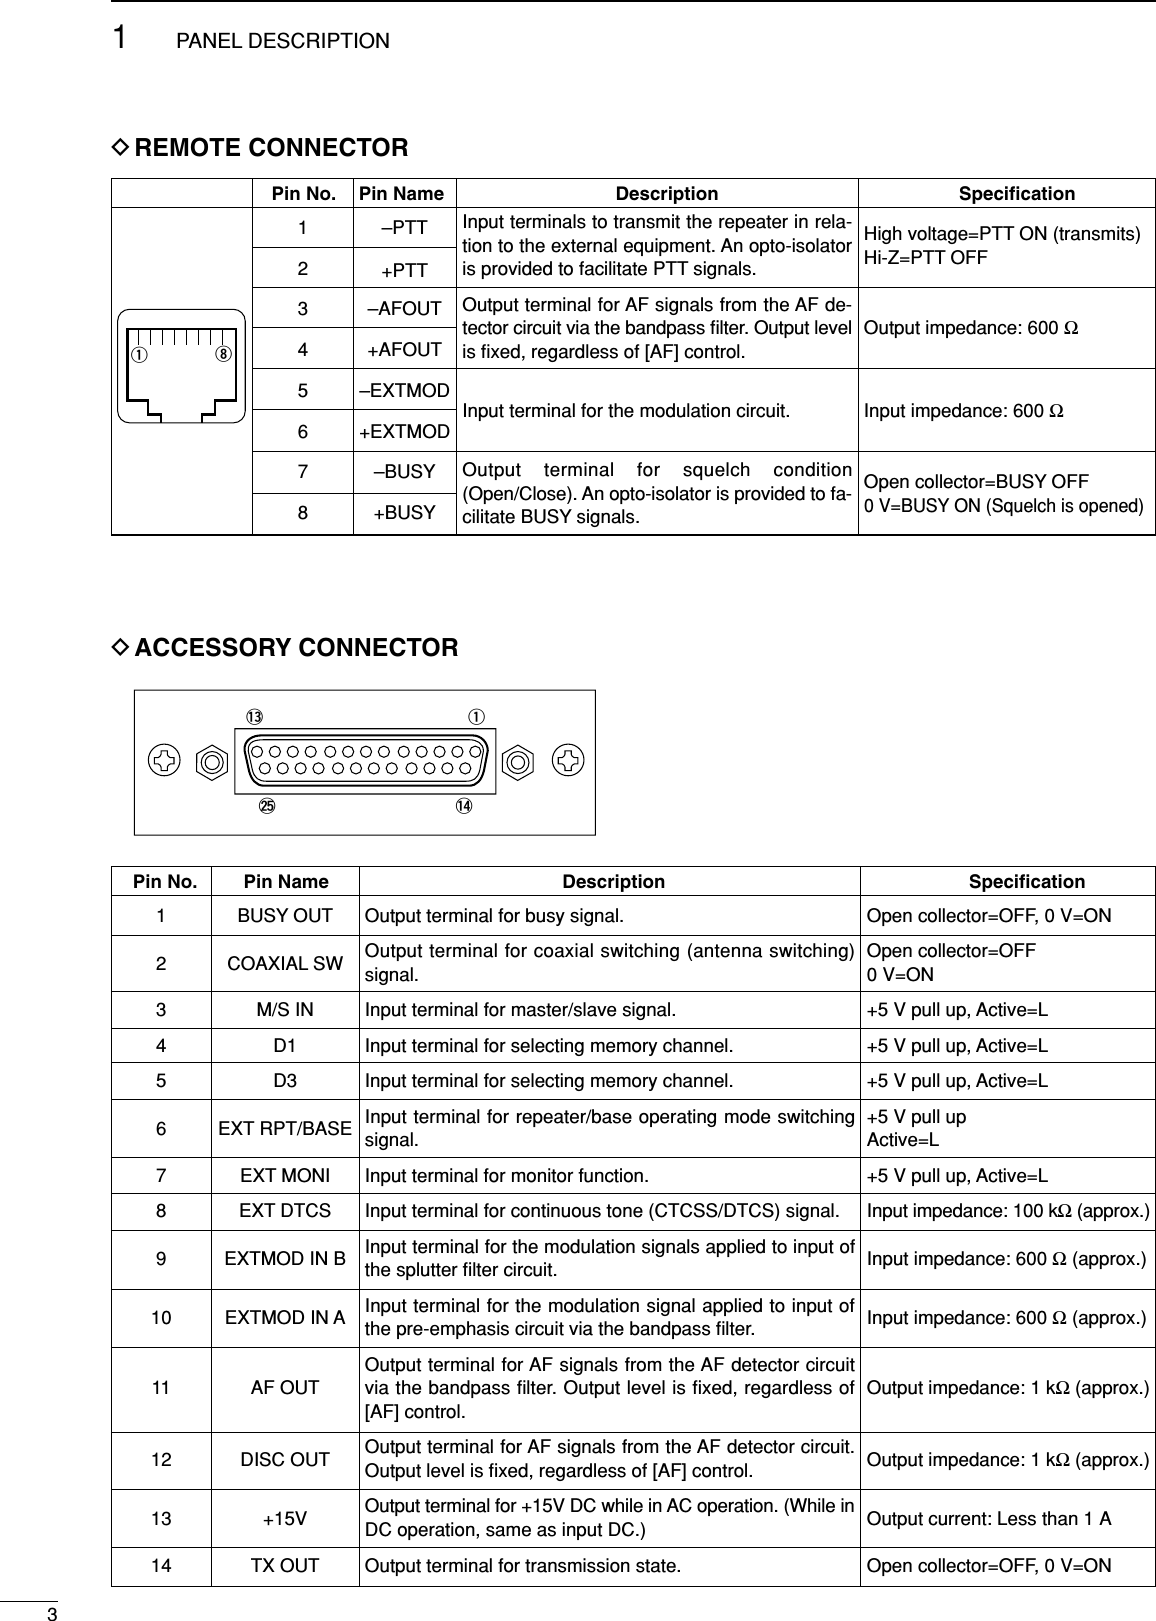 31PANEL DESCRIPTIONDREMOTE CONNECTORPin No. Pin Name Description Speciﬁcation12345678–PTT+PTT–AFOUT+AFOUT–EXTMOD+EXTMOD–BUSY+BUSYInput terminals to transmit the repeater in rela-tion to the external equipment. An opto-isolatoris provided to facilitate PTT signals.Output terminal for AF signals from the AF de-tector circuit via the bandpass ﬁlter. Output levelis ﬁxed, regardless of [AF] control.Input terminal for the modulation circuit.Output terminal for squelch condition(Open/Close). An opto-isolator is provided to fa-cilitate BUSY signals.High voltage=PTT ON (transmits)Hi-Z=PTT OFFOutput impedance: 600 ΩInput impedance: 600 ΩOpen collector=BUSY OFF0 V=BUSY ON (Squelch is opened)qiDACCESSORY CONNECTORPin No. Pin Name Description Speciﬁcation1234567891011121314BUSY OUTCOAXIAL SWM/S IND1D3EXT RPT/BASEEXT MONIEXT DTCSEXTMOD IN BEXTMOD IN AAF OUTDISC OUT+15VTX OUTOutput terminal for busy signal.Output terminal for coaxial switching (antenna switching)signal.Input terminal for master/slave signal.Input terminal for selecting memory channel.Input terminal for selecting memory channel.Input terminal for repeater/base operating mode switchingsignal.Input terminal for monitor function.Input terminal for continuous tone (CTCSS/DTCS) signal.Input terminal for the modulation signals applied to input ofthe splutter ﬁlter circuit.Input terminal for the modulation signal applied to input ofthe pre-emphasis circuit via the bandpass ﬁlter.Output terminal for AF signals from the AF detector circuitvia the bandpass ﬁlter. Output level is ﬁxed, regardless of[AF] control.Output terminal for AF signals from the AF detector circuit.Output level is ﬁxed, regardless of [AF] control.Output terminal for +15V DC while in AC operation. (While inDC operation, same as input DC.)Output terminal for transmission state.Open collector=OFF, 0 V=ONOpen collector=OFF0 V=ON+5 V pull up, Active=L+5 V pull up, Active=L+5 V pull up, Active=L+5 V pull upActive=L+5 V pull up, Active=LInput impedance: 100 kΩ(approx.)Input impedance: 600 Ω(approx.)Input impedance: 600 Ω(approx.)Output impedance: 1 kΩ(approx.)Output impedance: 1 kΩ(approx.)Output current: Less than 1 AOpen collector=OFF, 0 V=ONq!3!4@5